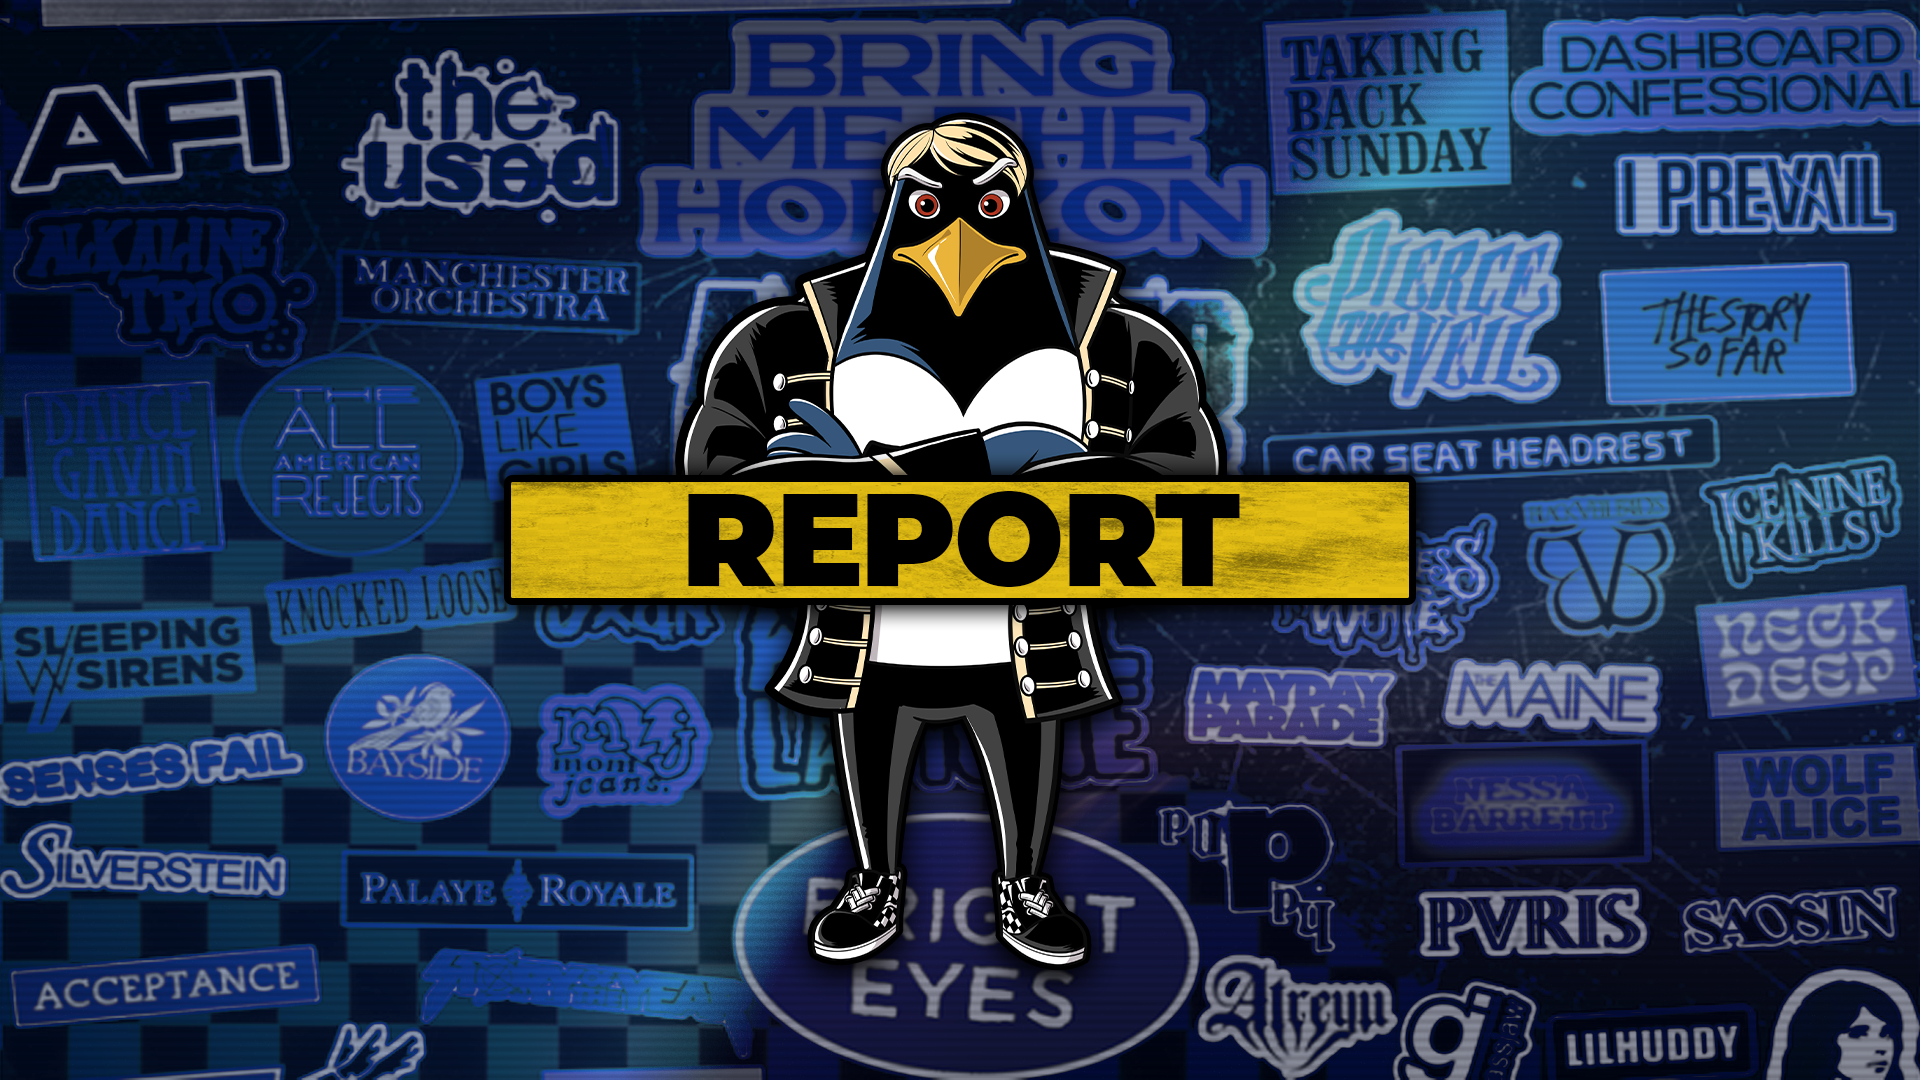 Informative Emo Night 'REPORT' promotional image with a cartoon penguin in punk fashion, standing before a backdrop of band names in glowing neon, such as AFI, The Used, and Bring Me The Horizon. The 'REPORT' text displayed on a yellow strip conveys an aspect of event management or feedback, tailored for the emo and punk music community.